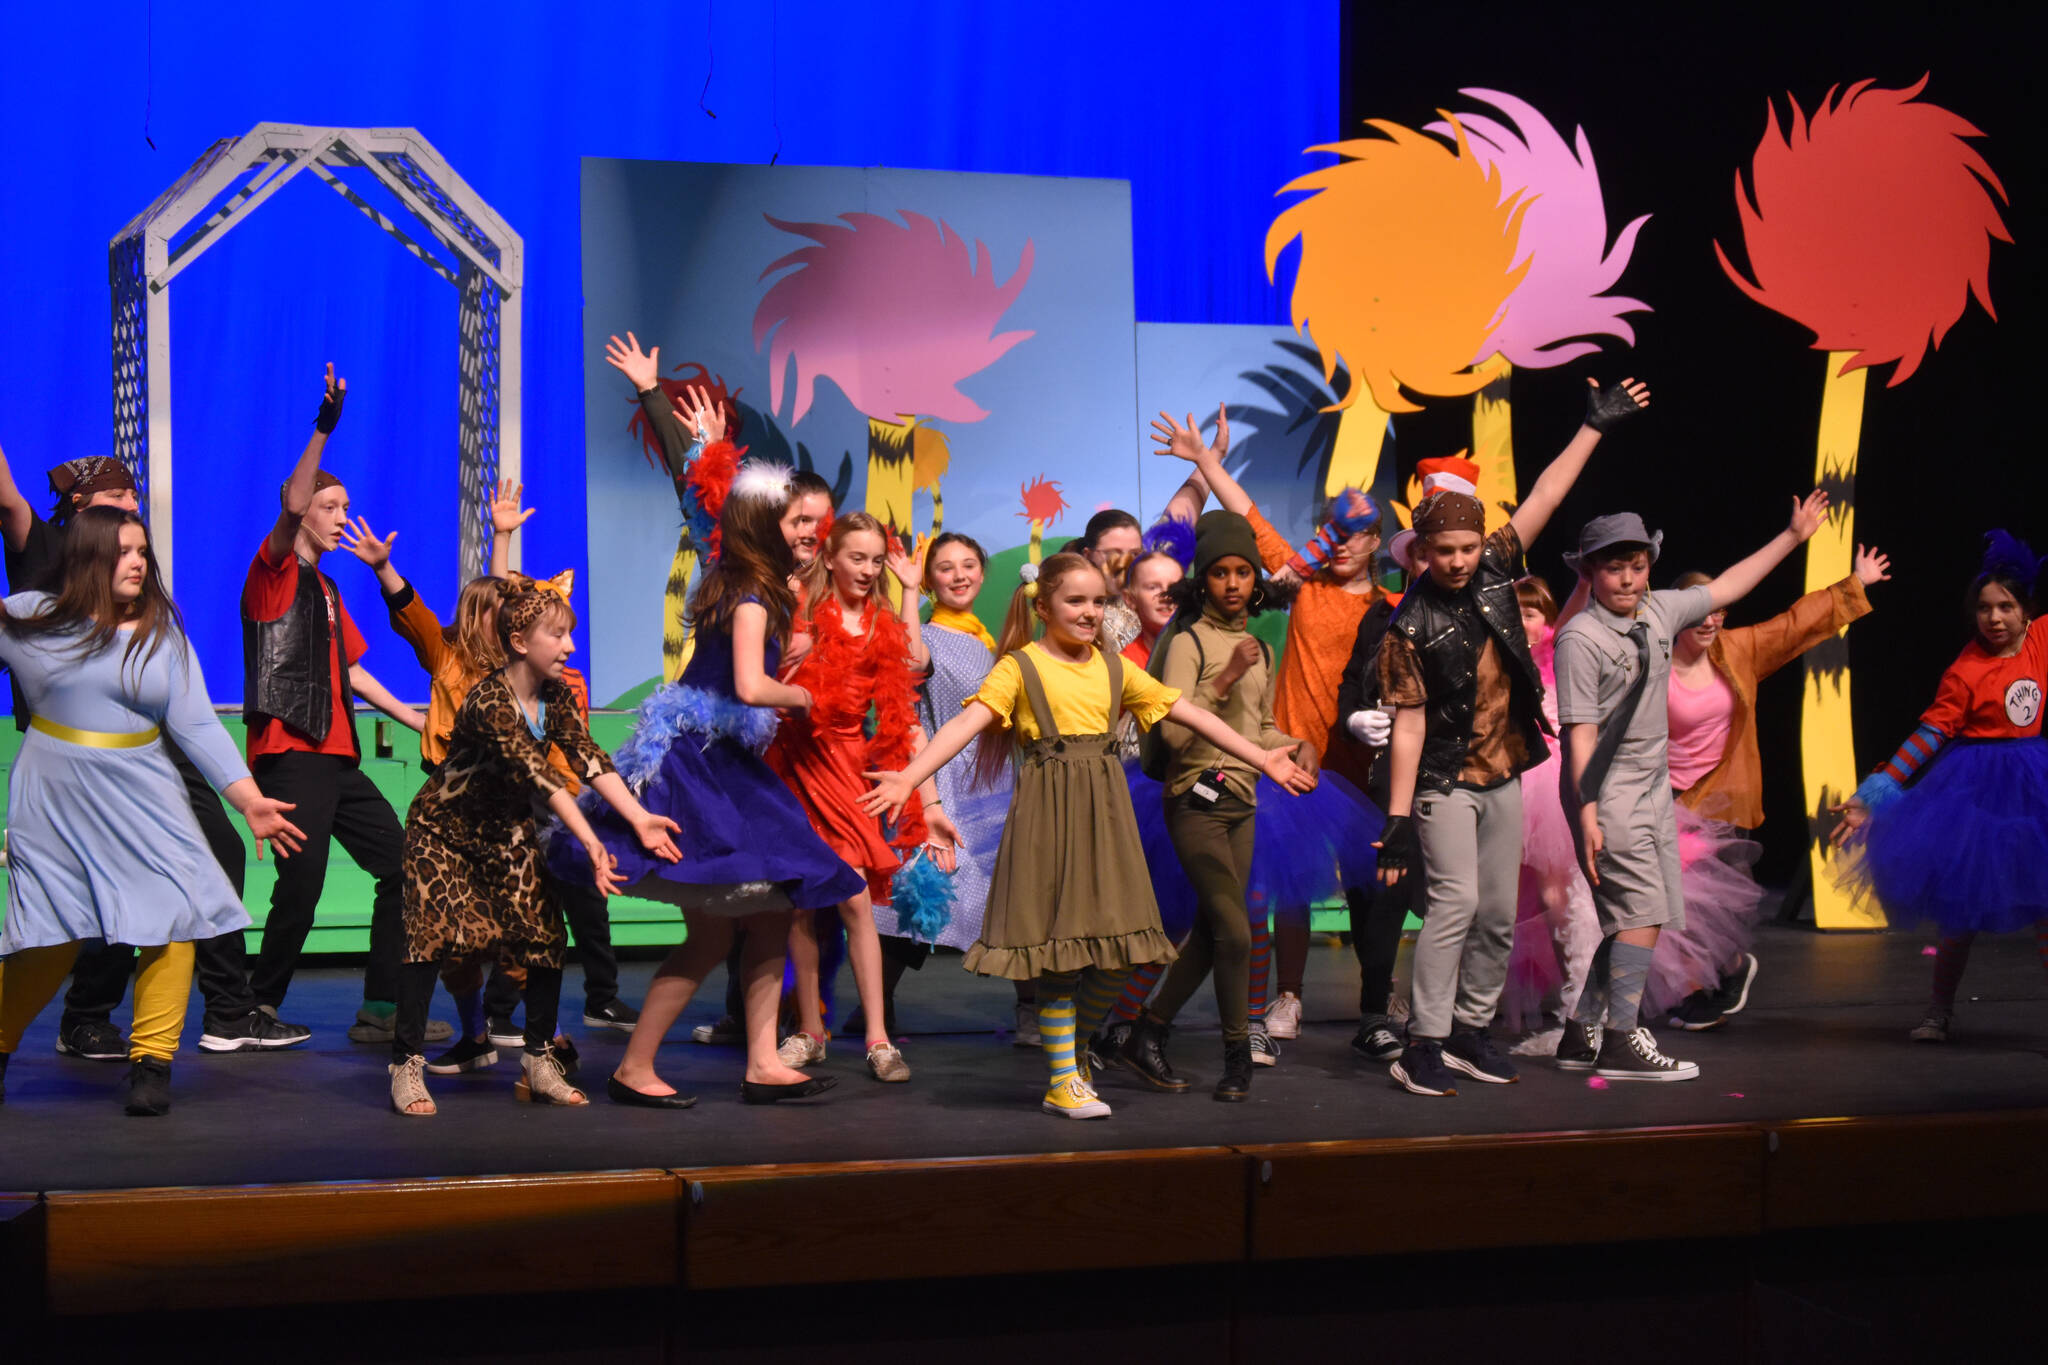 The cast of Triumvirate Theatre’s production of “Seussical” rehearse on Wednesday, Feb. 8, 2023, in the Renee C. Henderson Auditorium at Kenai Central High School in Kenai, Alaska. (Jake Dye/Peninsula Clarion)